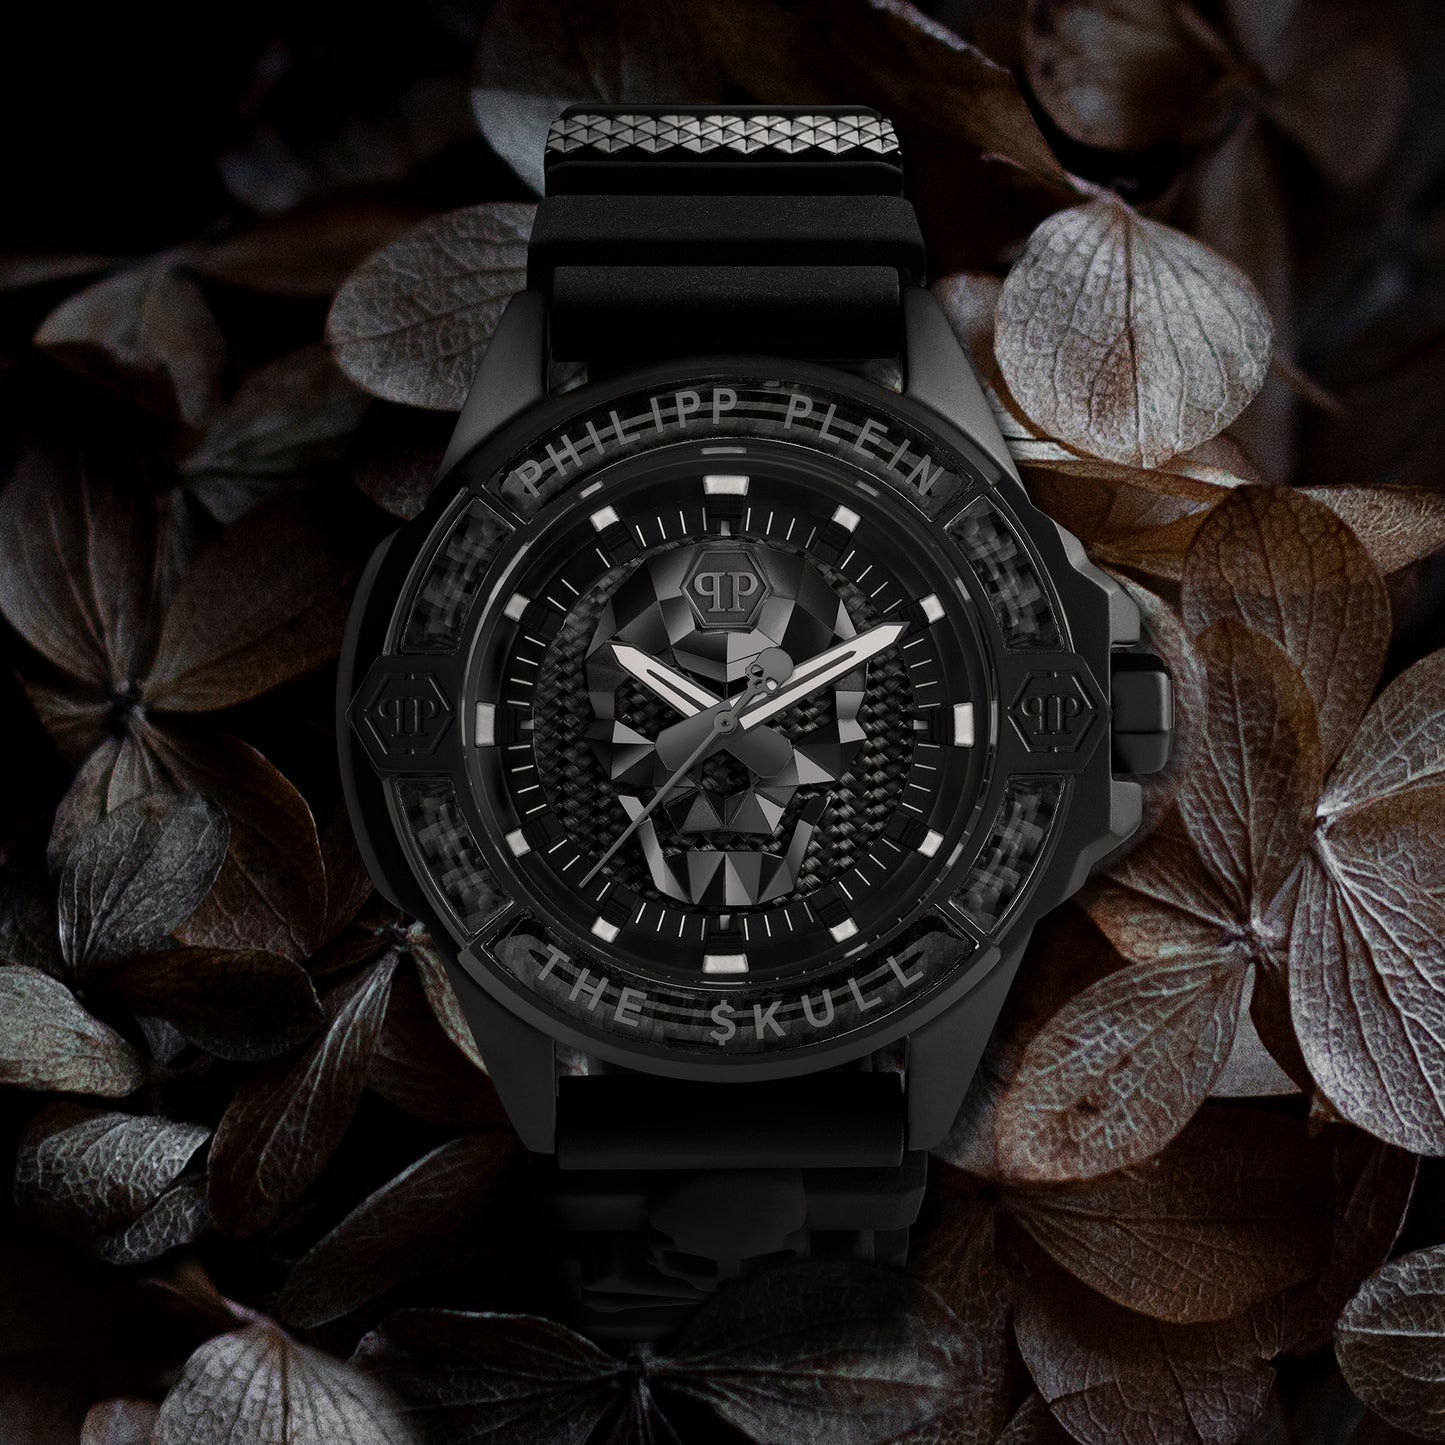 The $Kull Carbon Fiber Male Black Analog Silicon Watch PWAAA2022